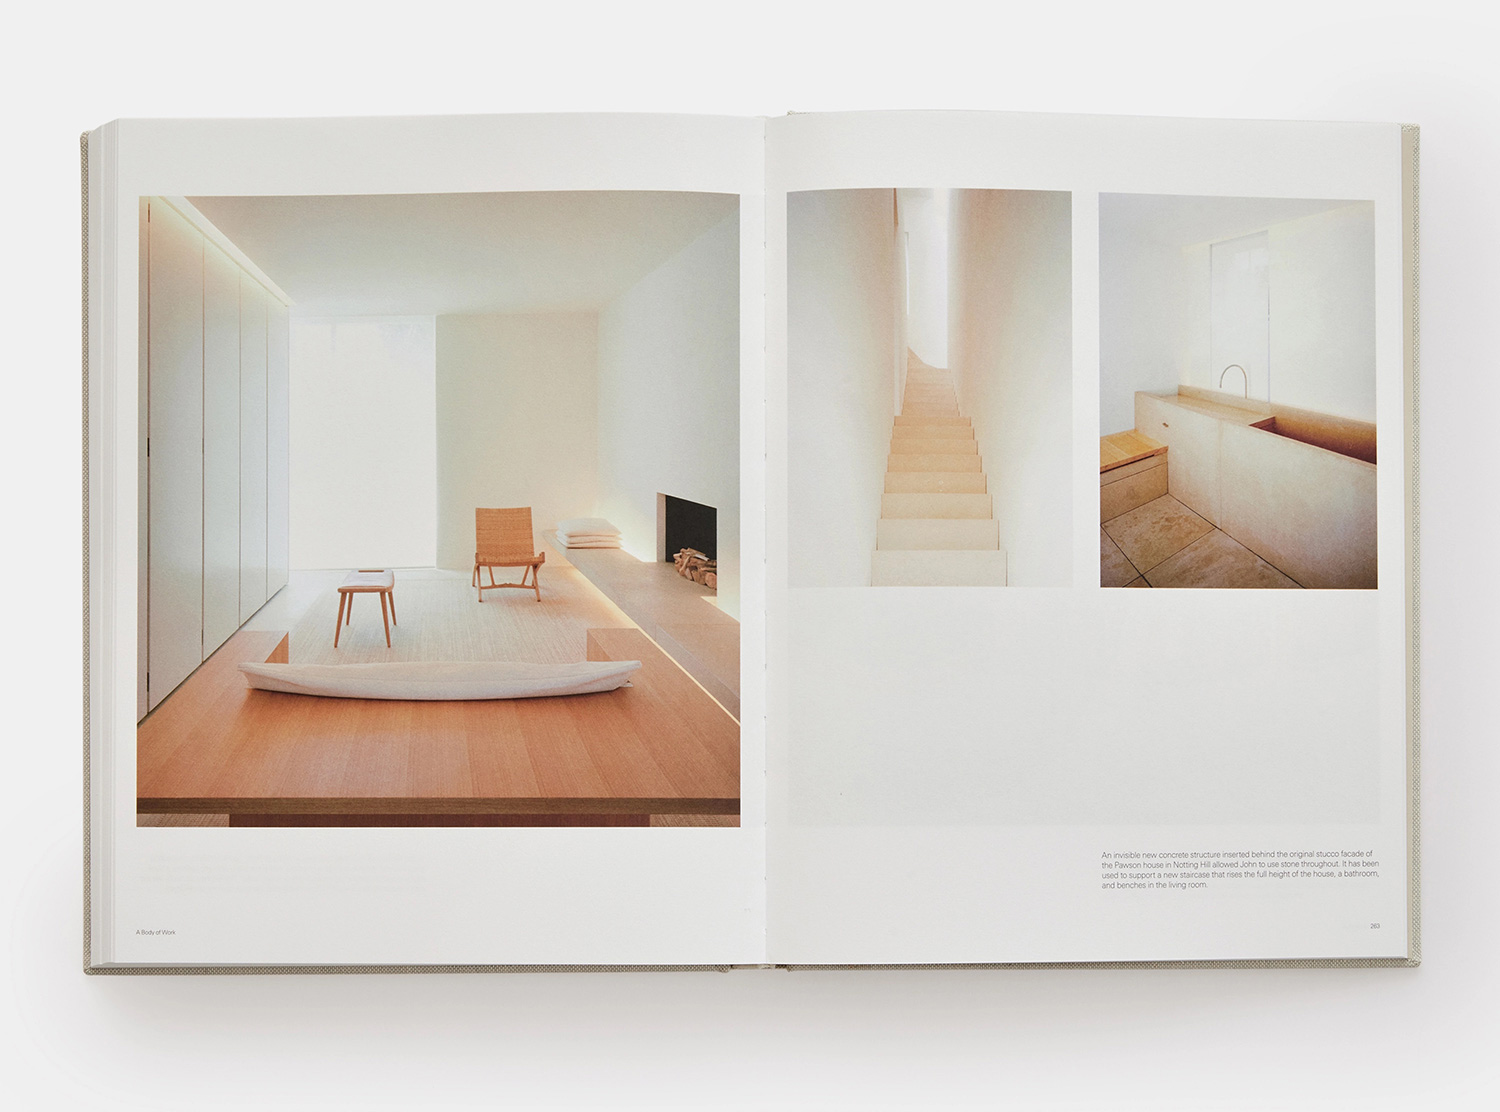 The book features never-seen-before photos of Pawson's works